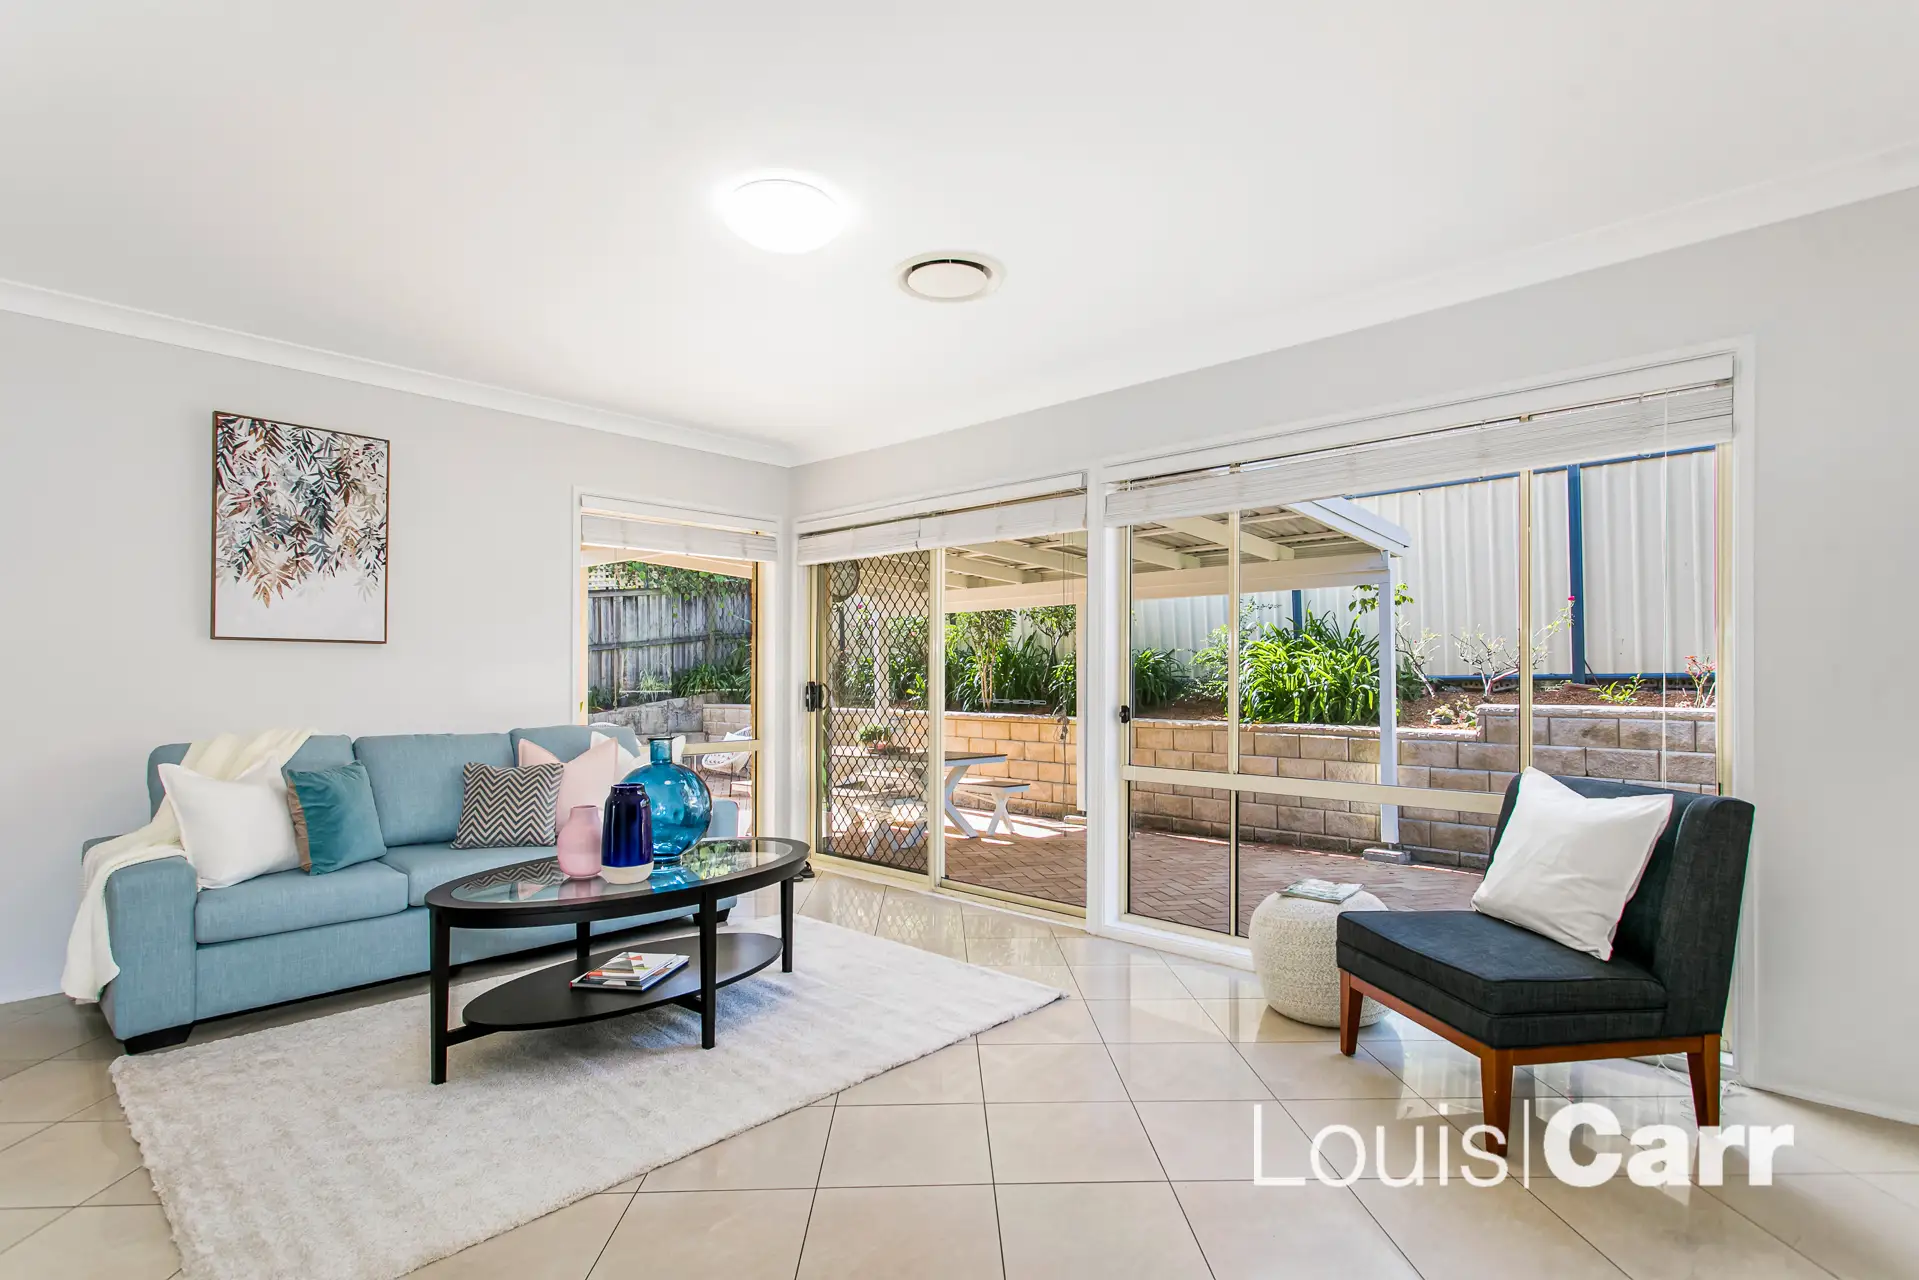 Photo #9: 11 Millbrook Place, Cherrybrook - Sold by Louis Carr Real Estate